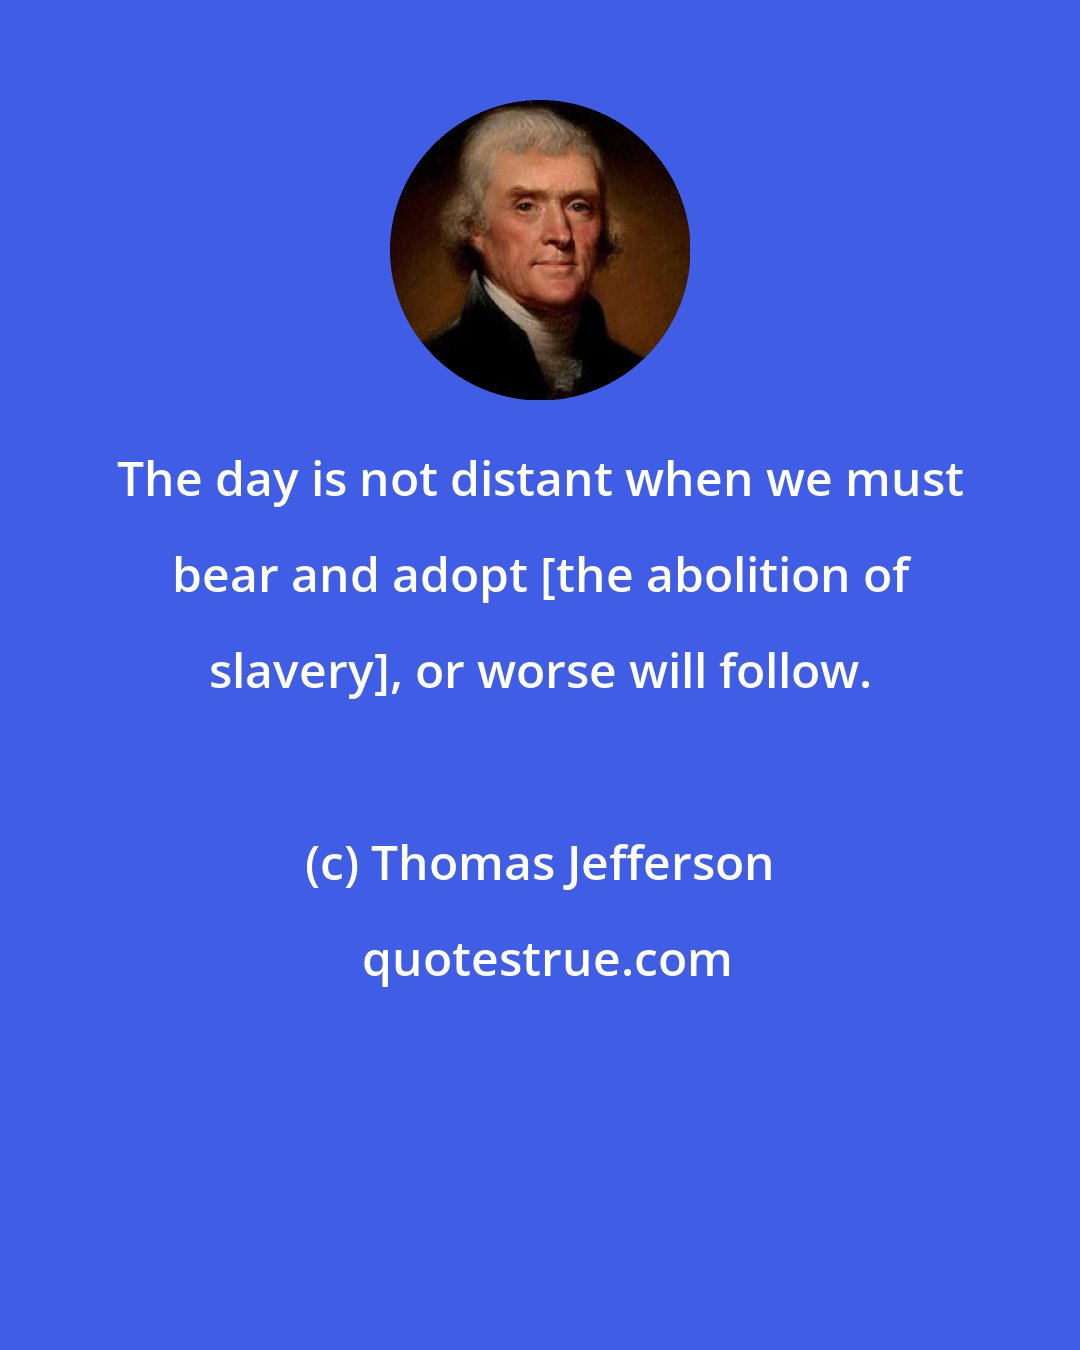 Thomas Jefferson: The day is not distant when we must bear and adopt [the abolition of slavery], or worse will follow.